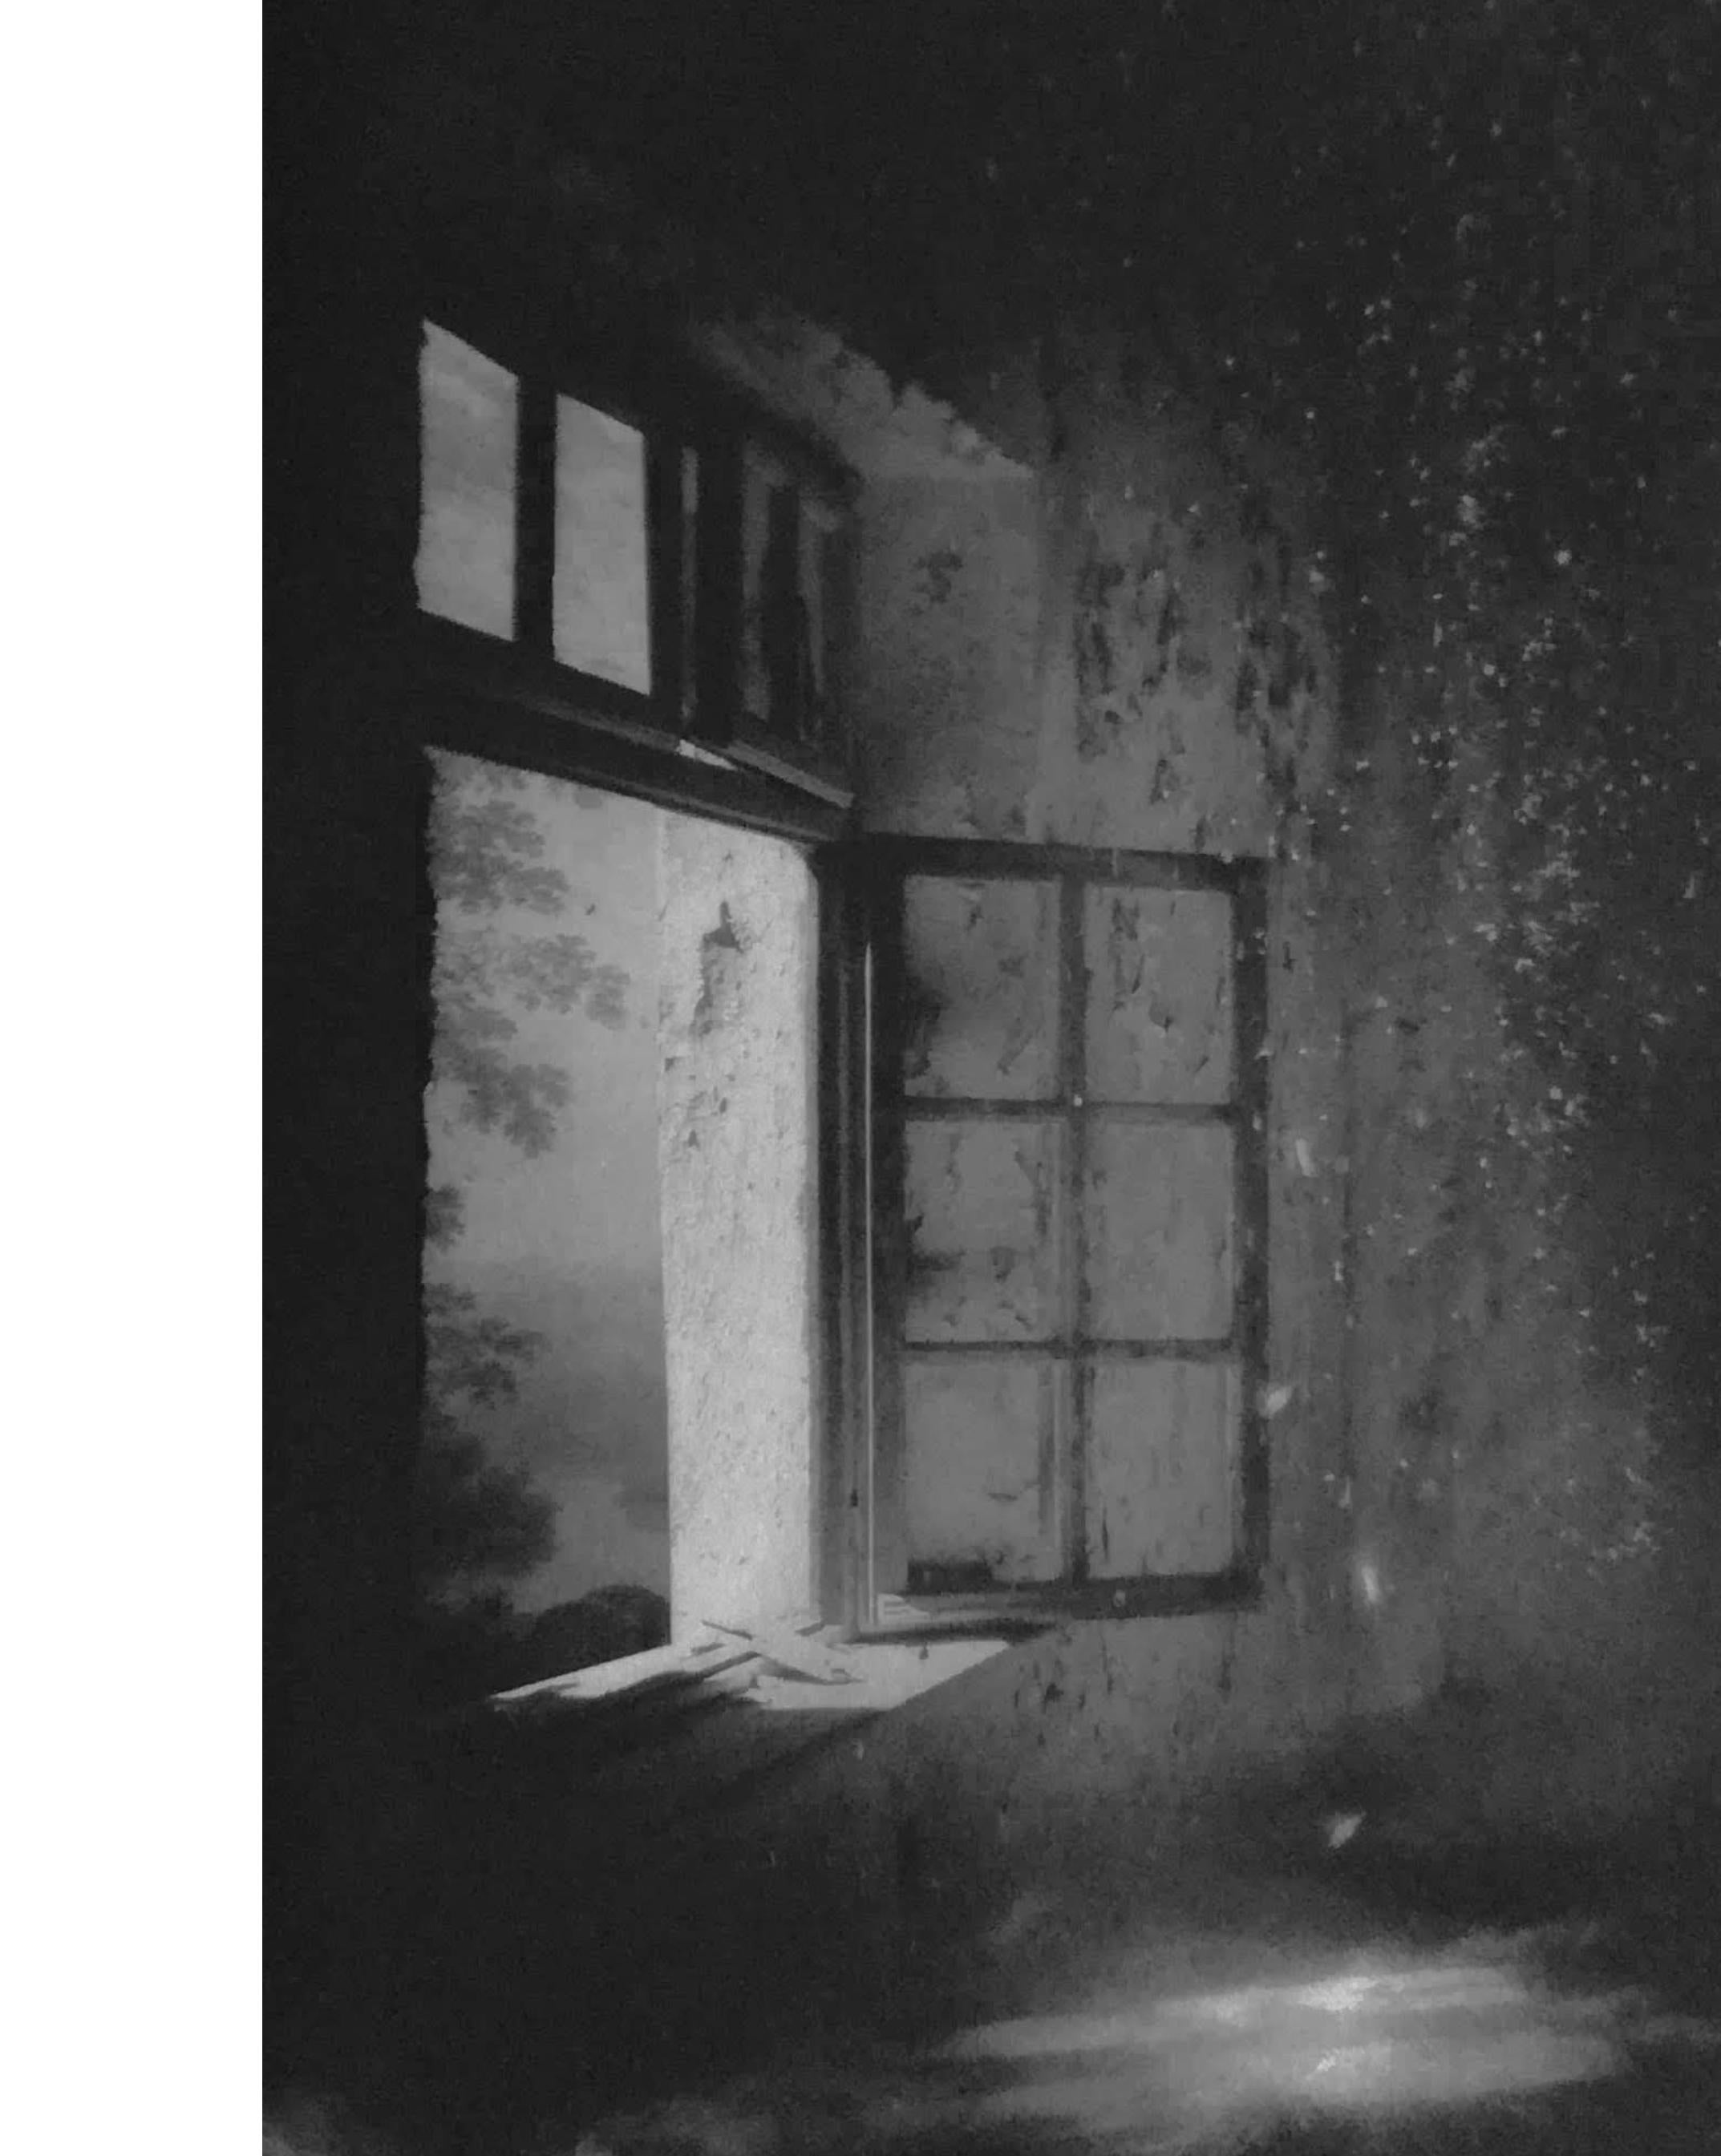 Photopolymer Photogravure Etching on Fine Art paper. Interior Photography, Romantic, Abandoned place, Nature, Window
Work Title : 